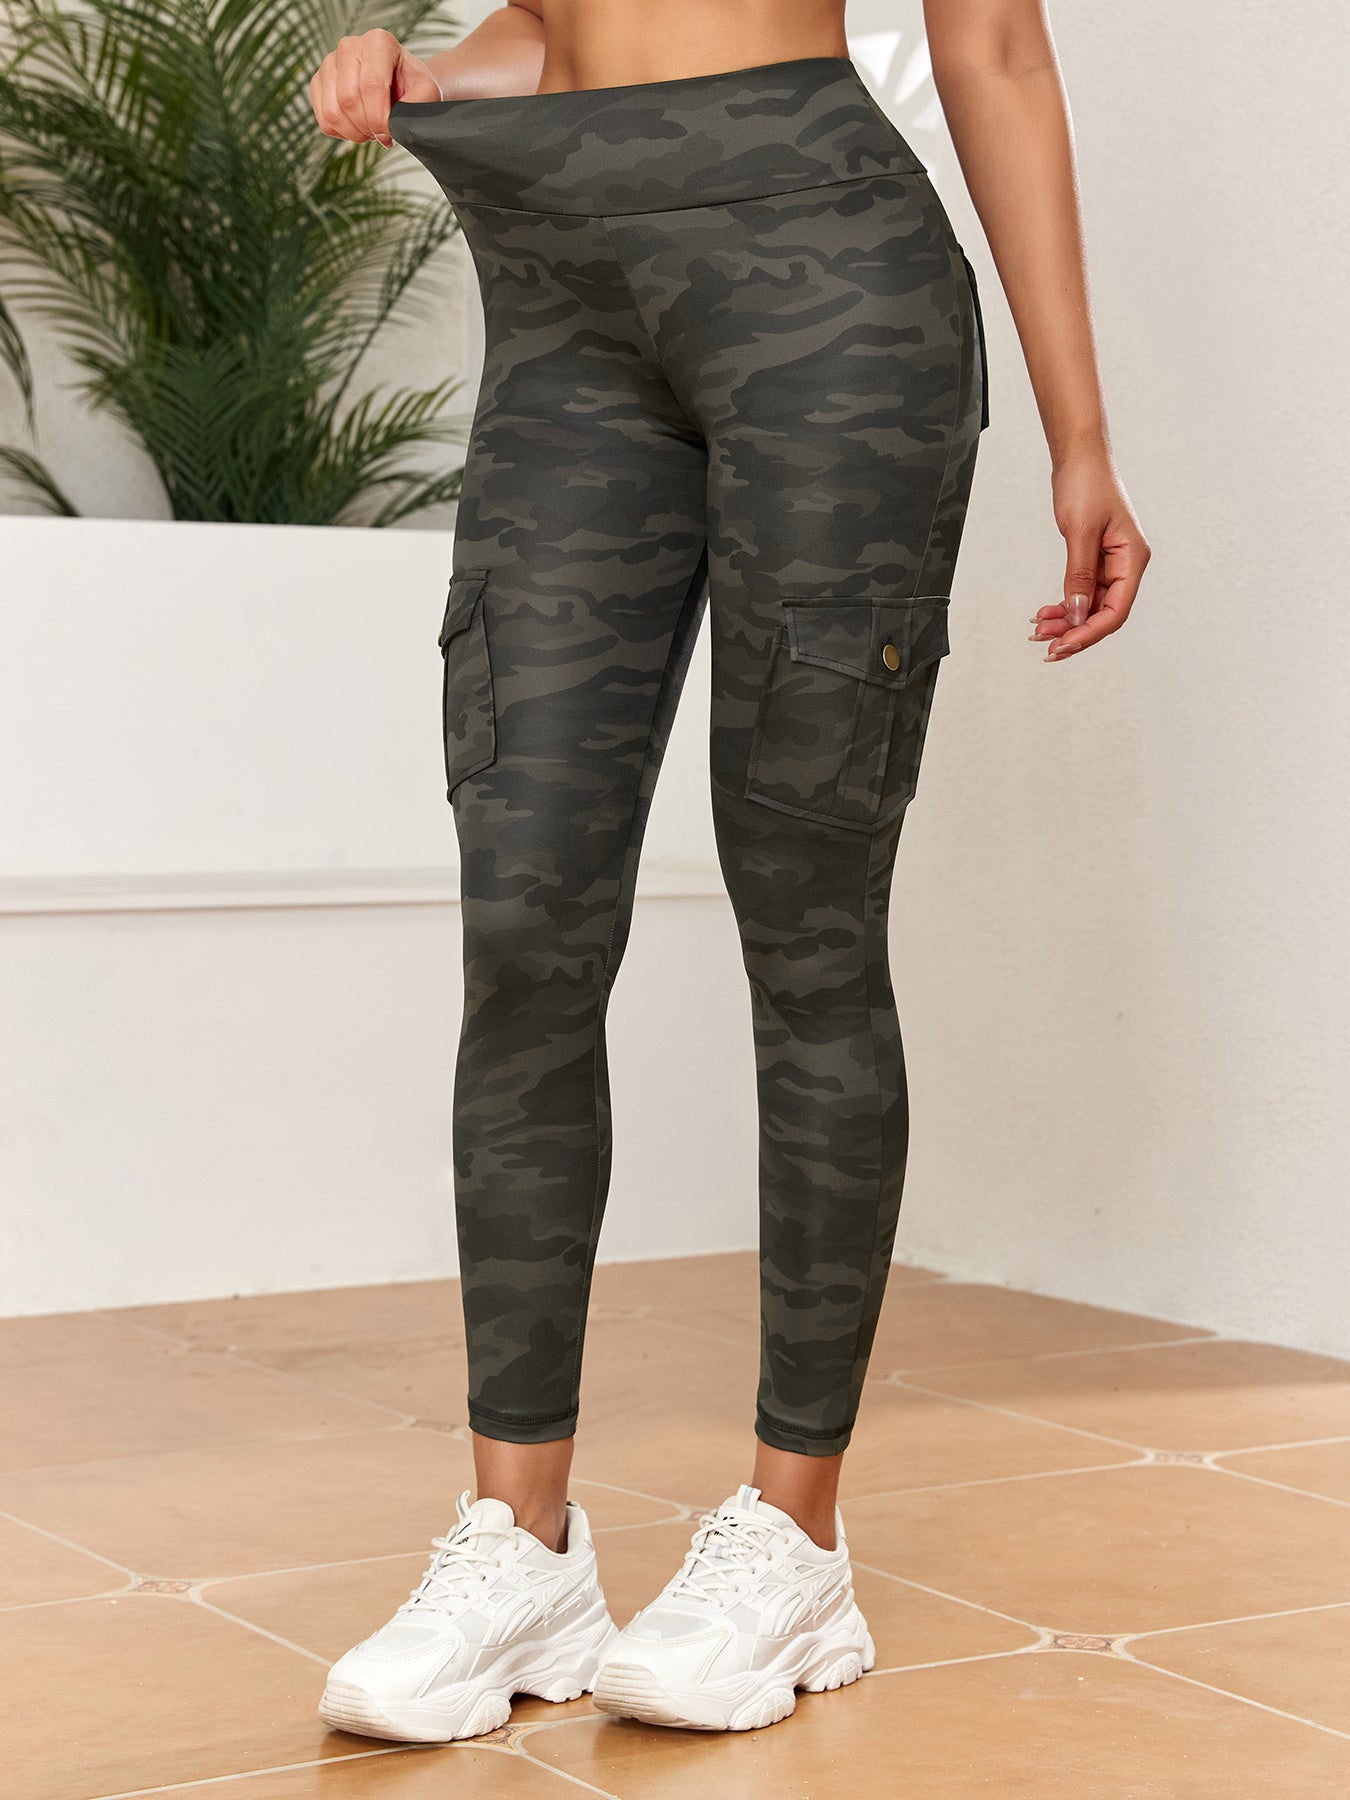 Skinny Camo Leggings for Women: Elevate Your Summer Style with a Fusion of Fashion and Functionality - CasualFlowshop